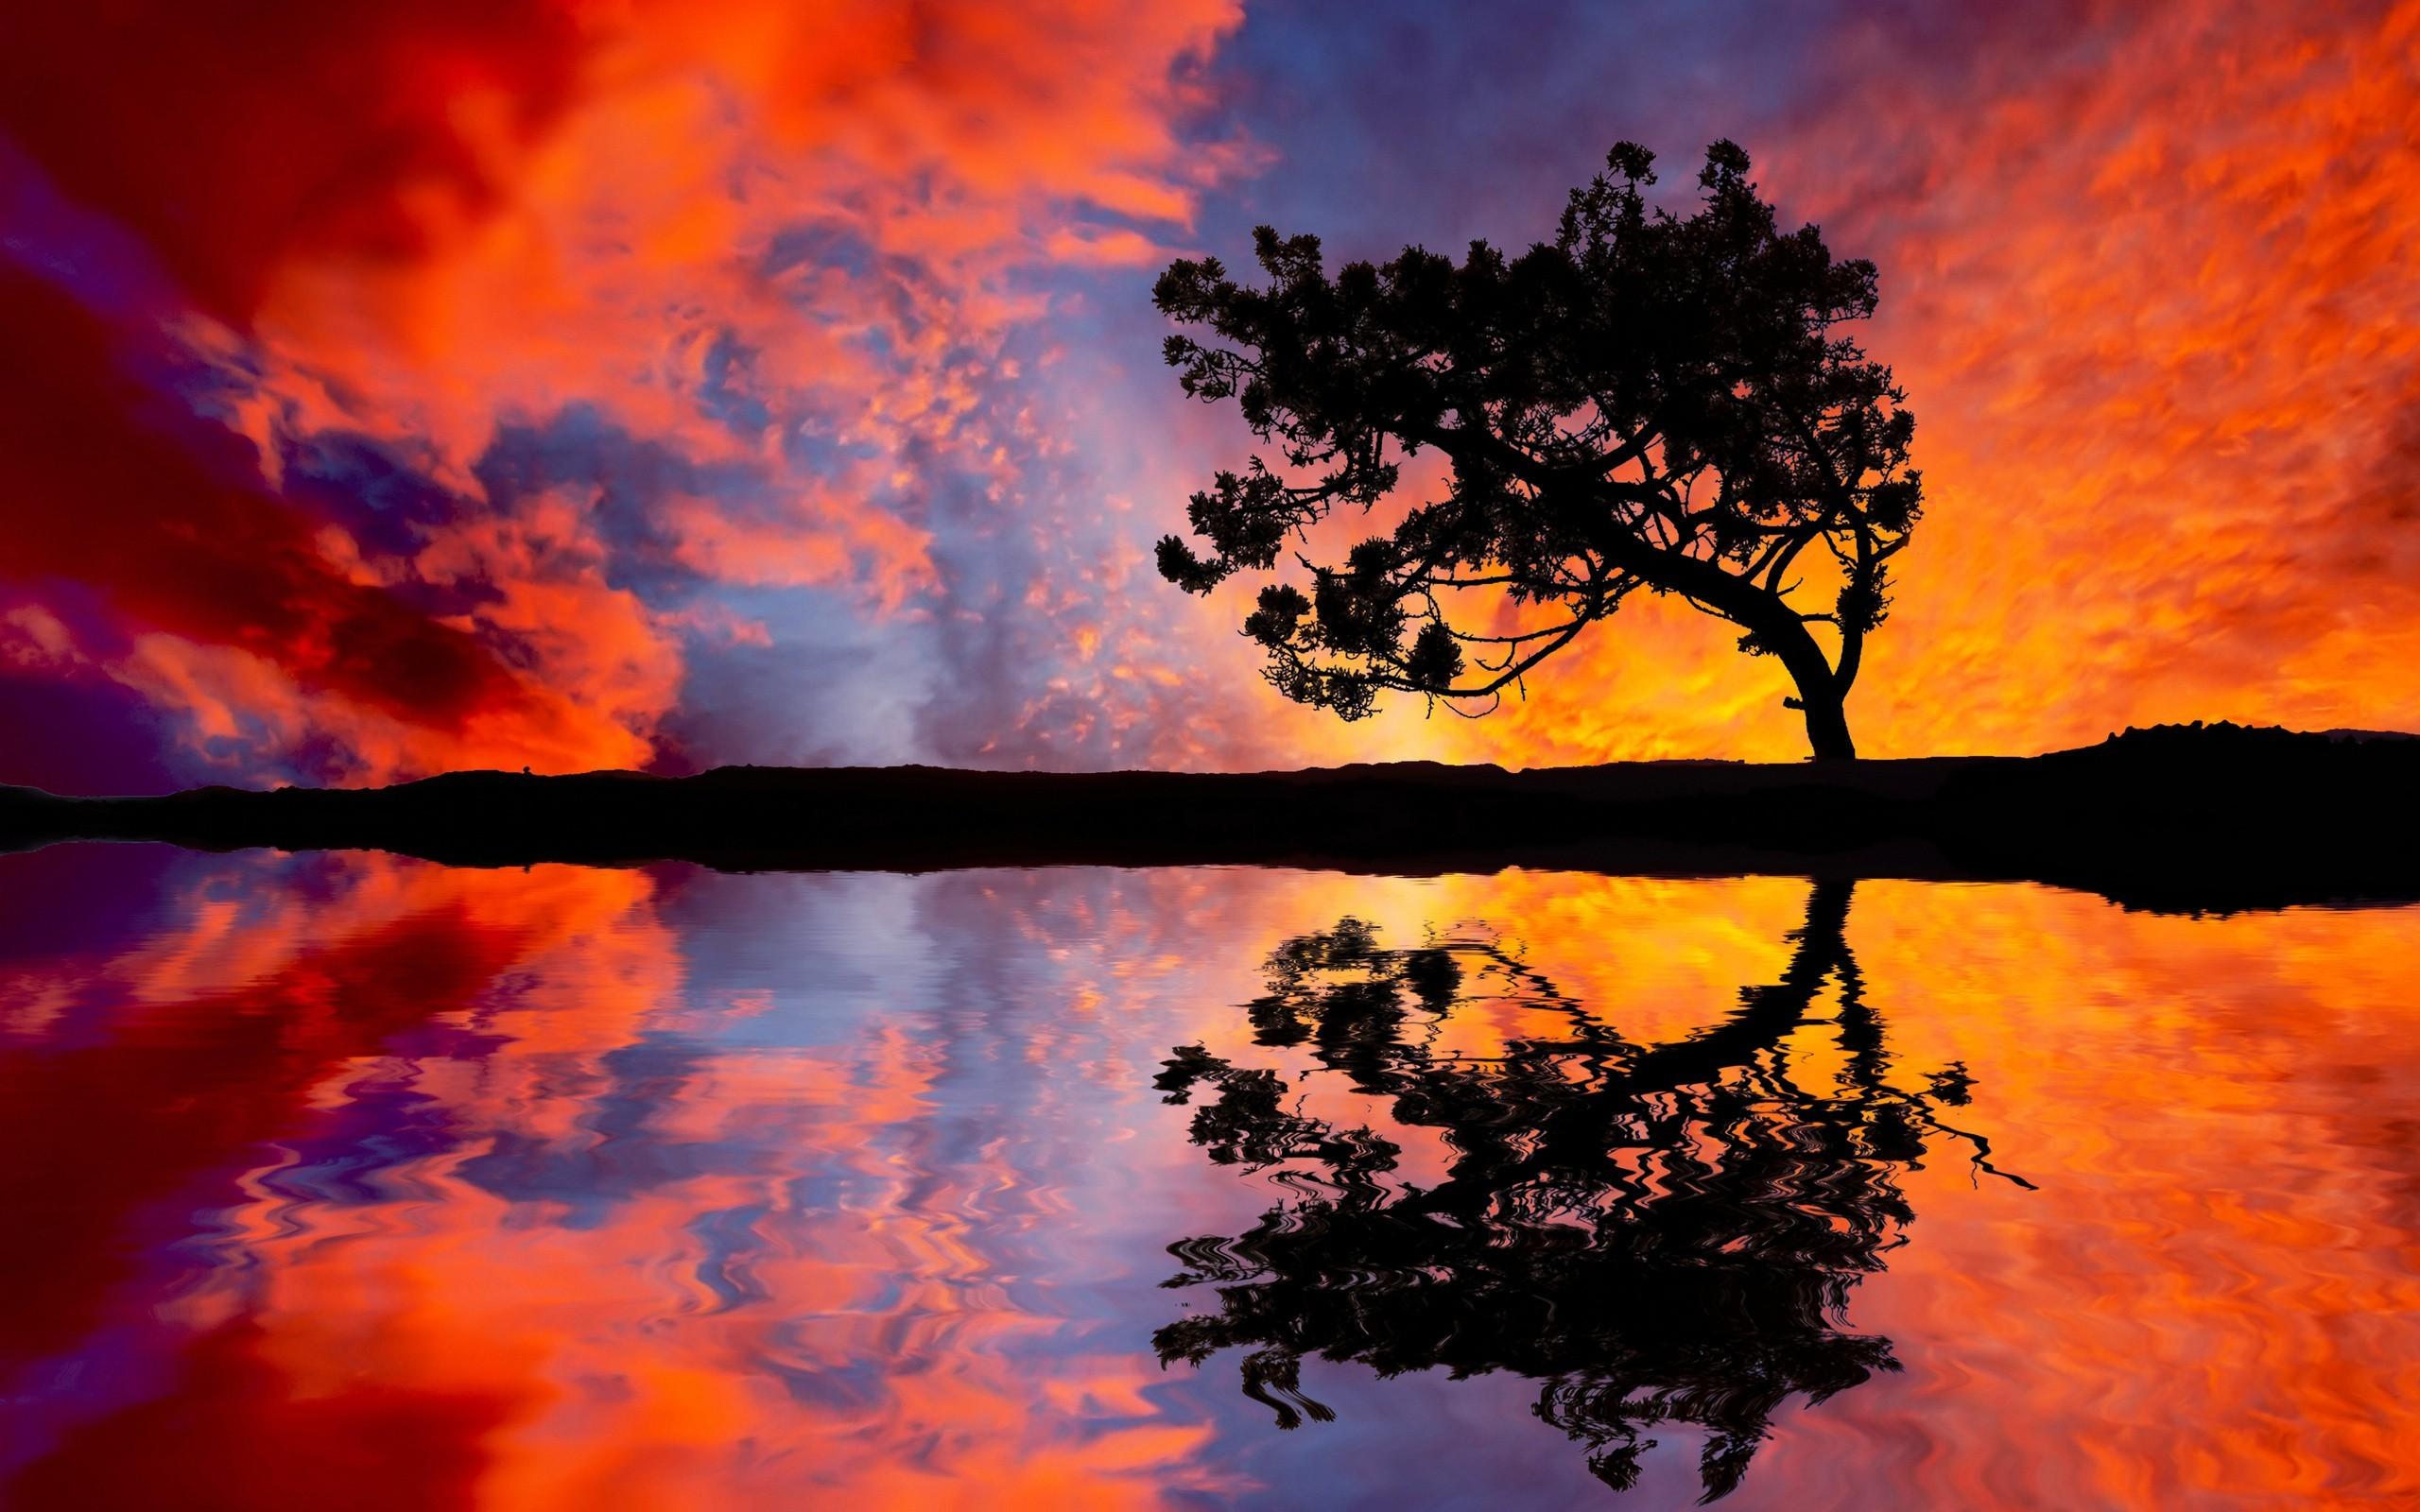 Landscapes reflections trees wallpaper. PC